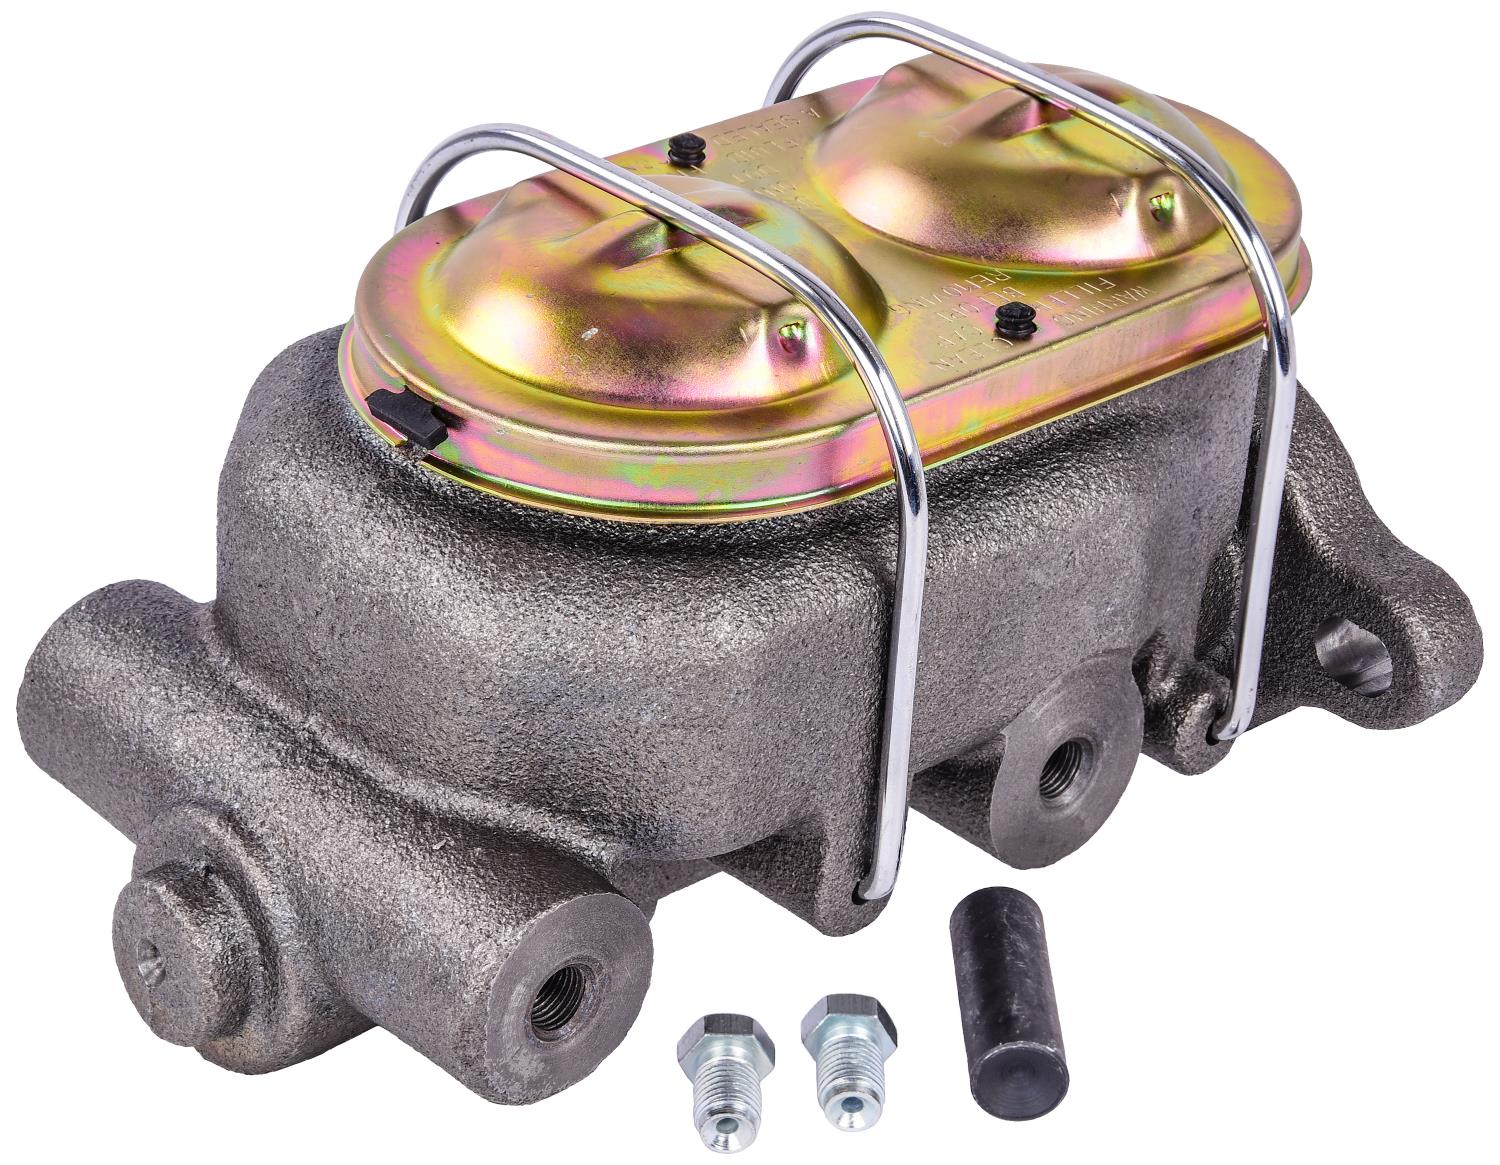 Brake Master Cylinder with Dual Reservoir for Disc/Drum Applications, Corvette Style [GM Universal Mounting]